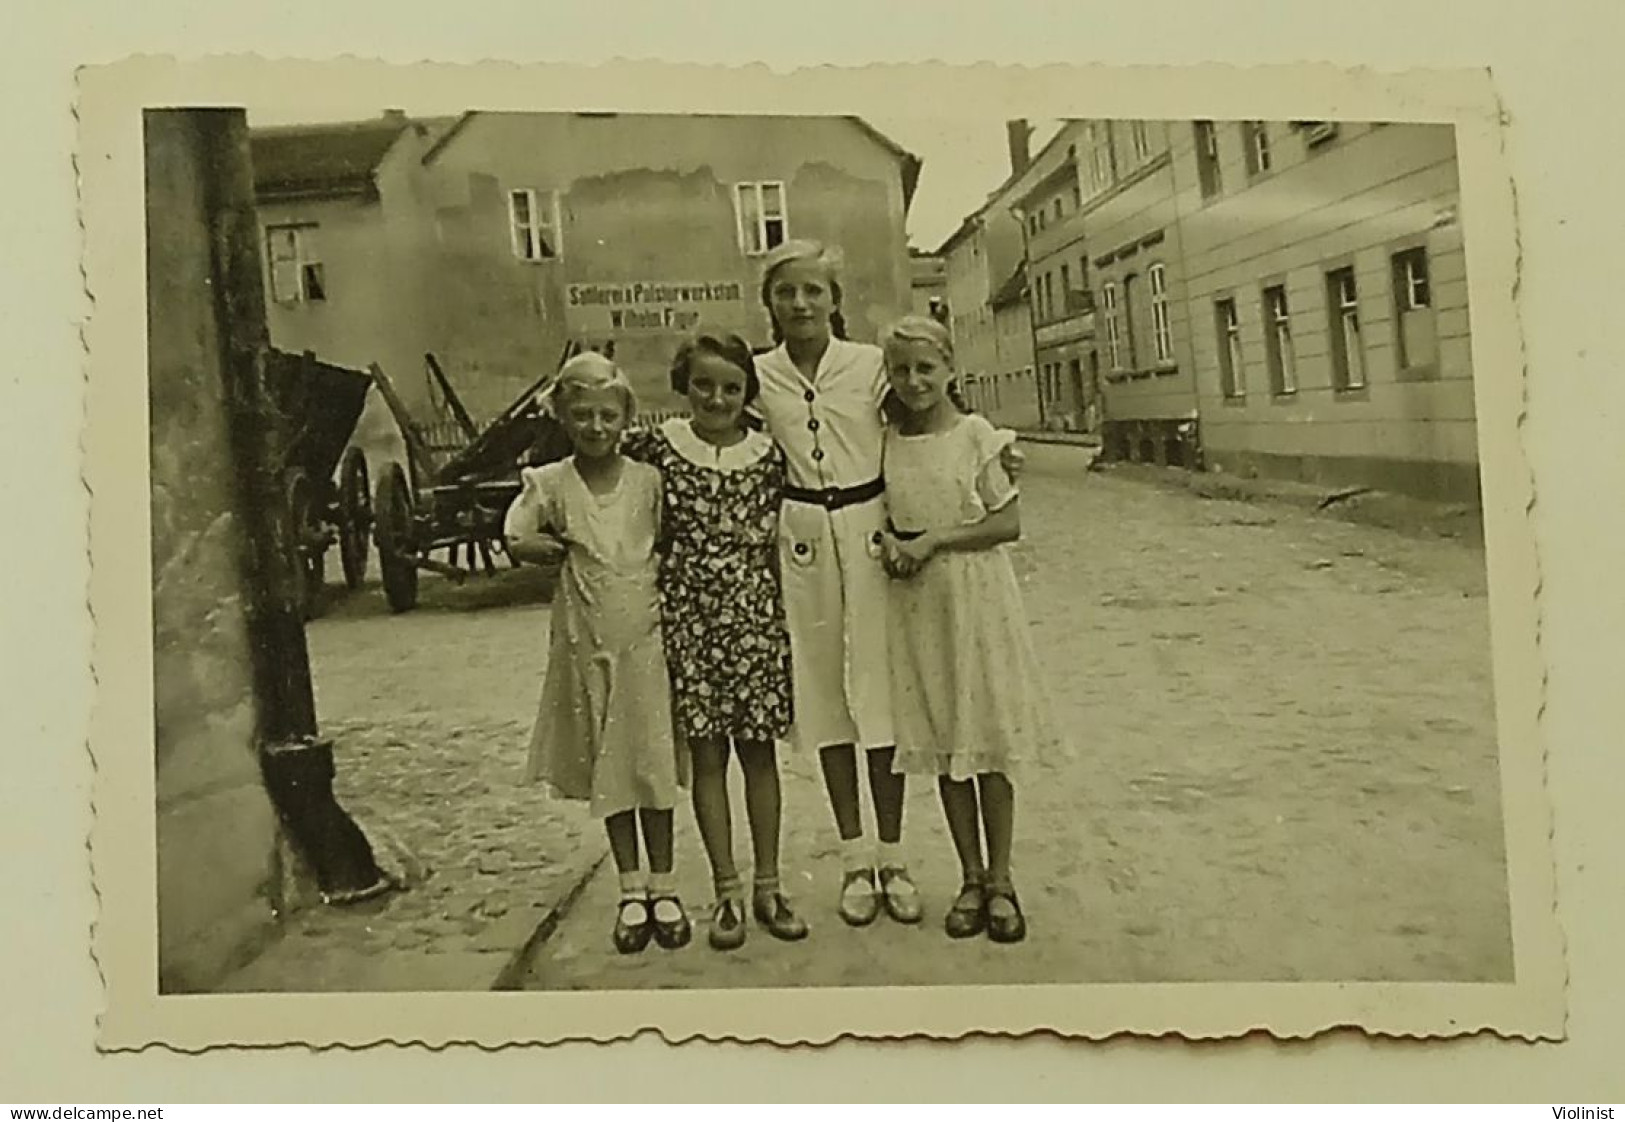 Germany-Four Young Girls Standing On The Street-Photo Gowir,Finsterwalde-old Photo - Plaatsen